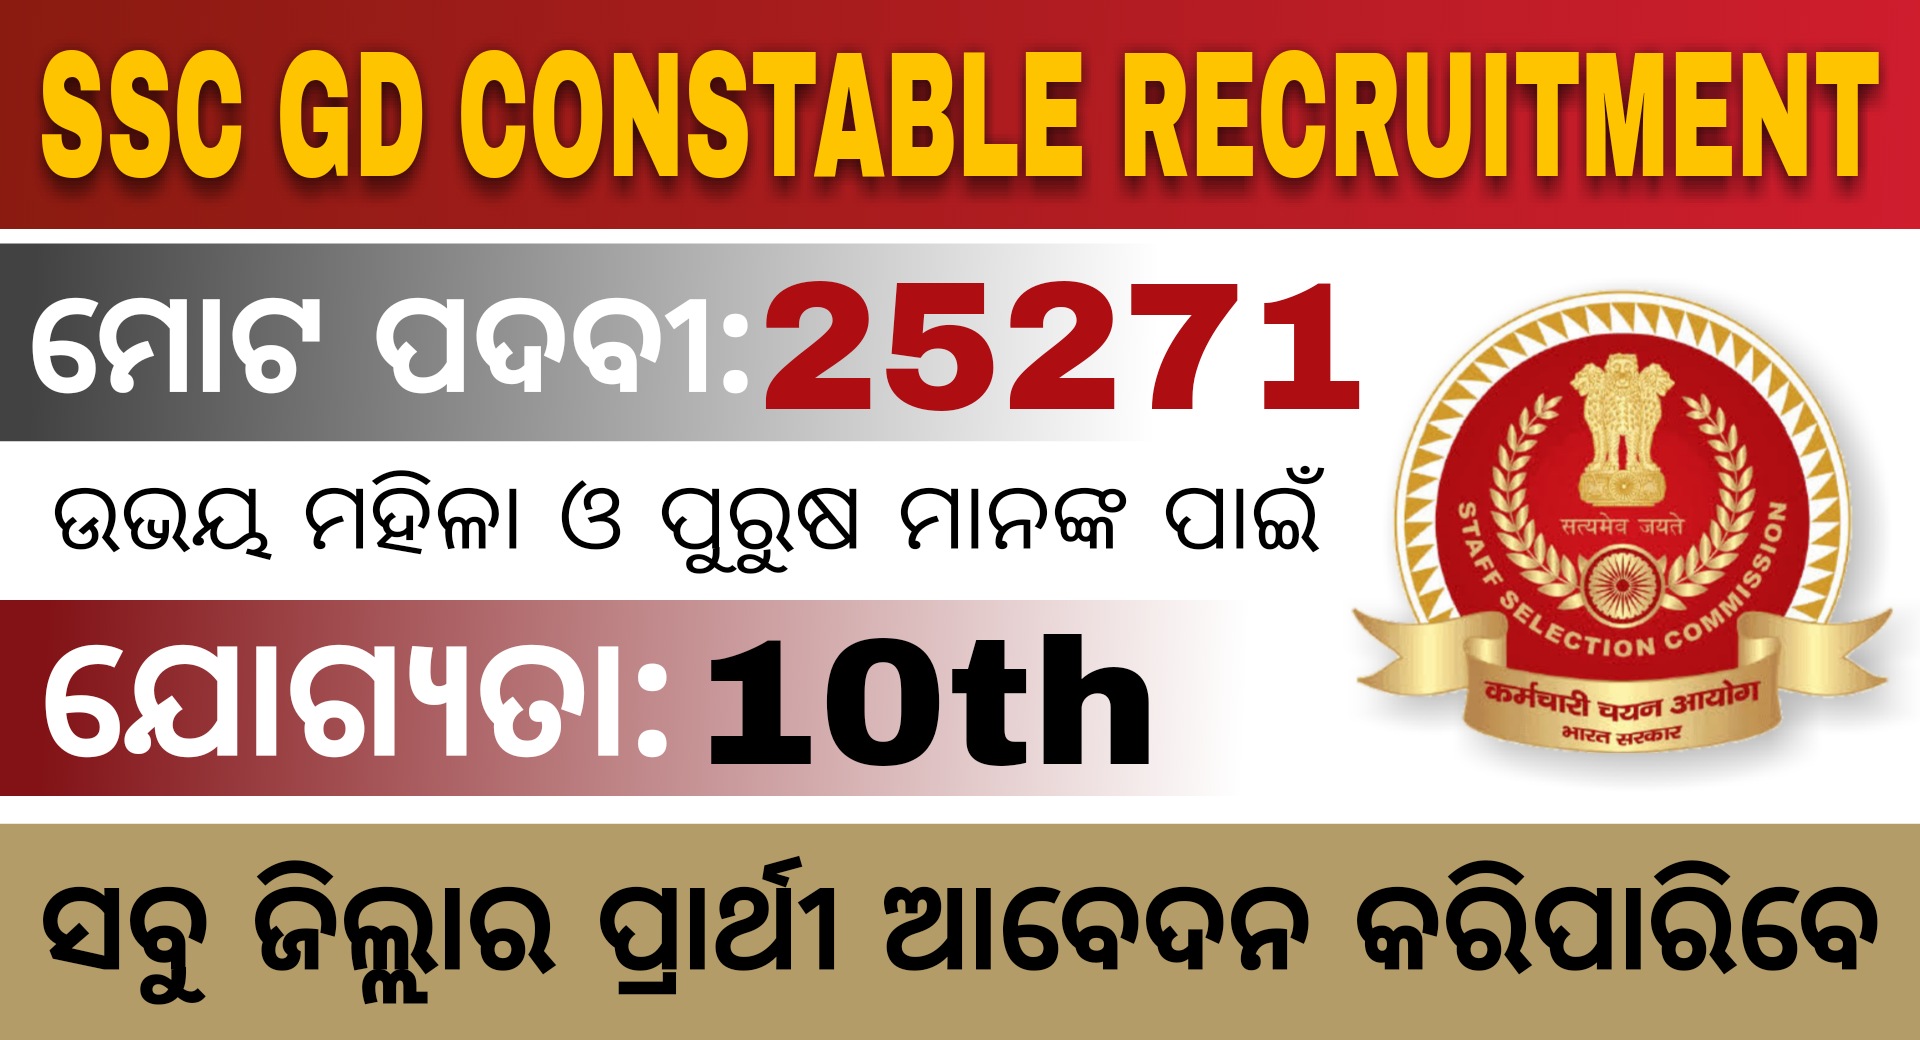 SSC GD Constable Recruitment 2021 – Apply Now for 25271 Posts